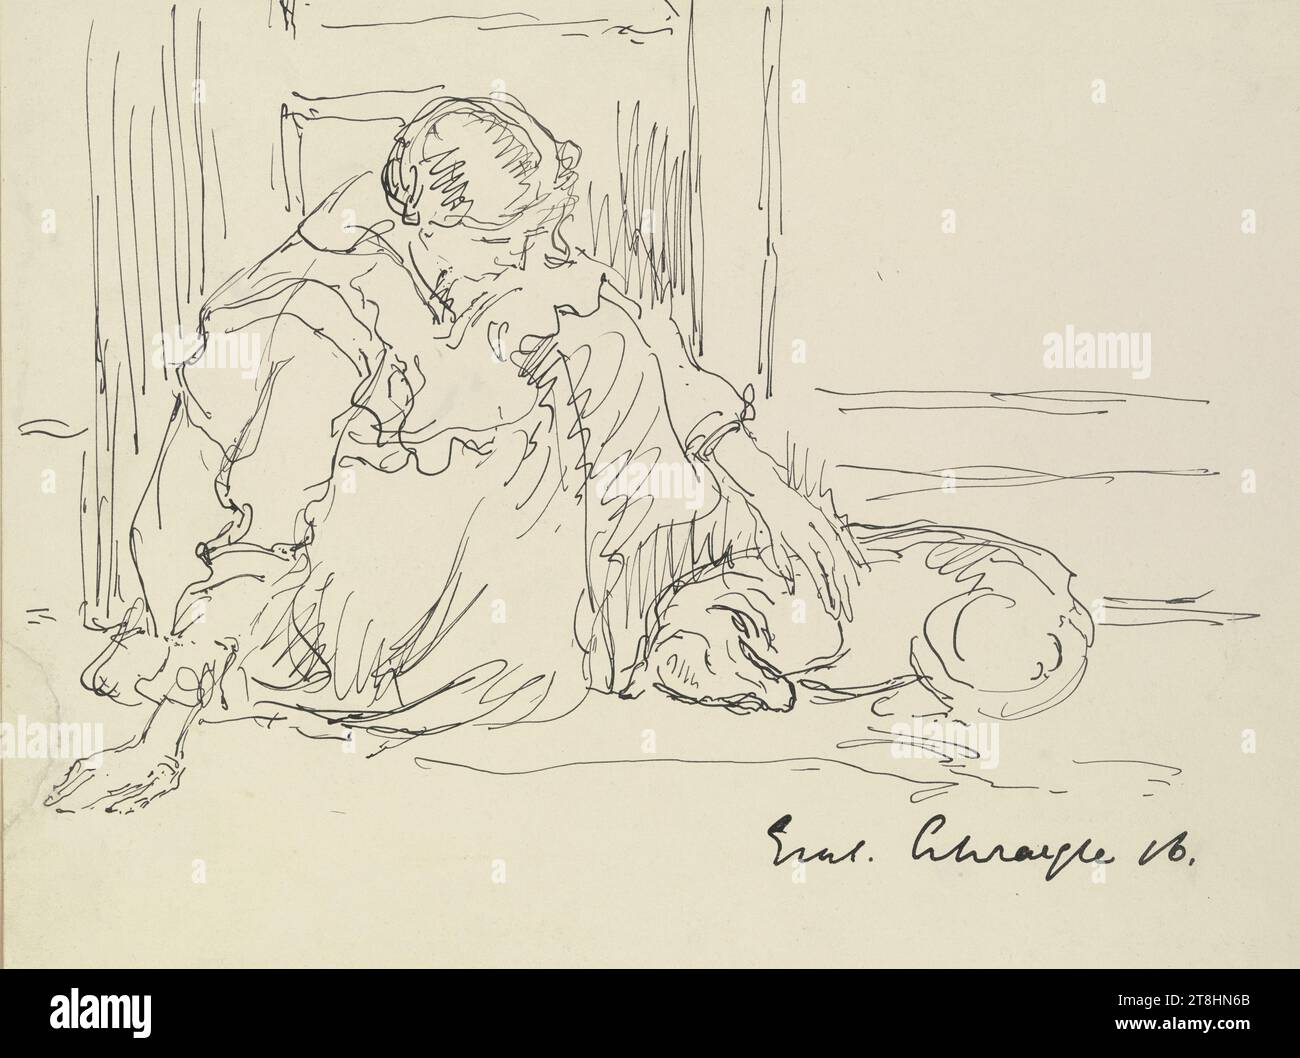 GUSTAV SCHRAEGLE, Crouching girl with dog, 1916, sheet, 182 x 234 mm, pen in black on cream-colored paper, Crouching girl with dog, GUSTAV SCHRAEGLE, 20TH CENTURY, DRAWING, pen in black on cream-colored paper, INK?, INK?, PAPER, PEN DRAWING, GERMAN, FIGURE STUDY, Signed and dated lower right, with the pen in black, Gus. Schraegle 16 Stock Photo